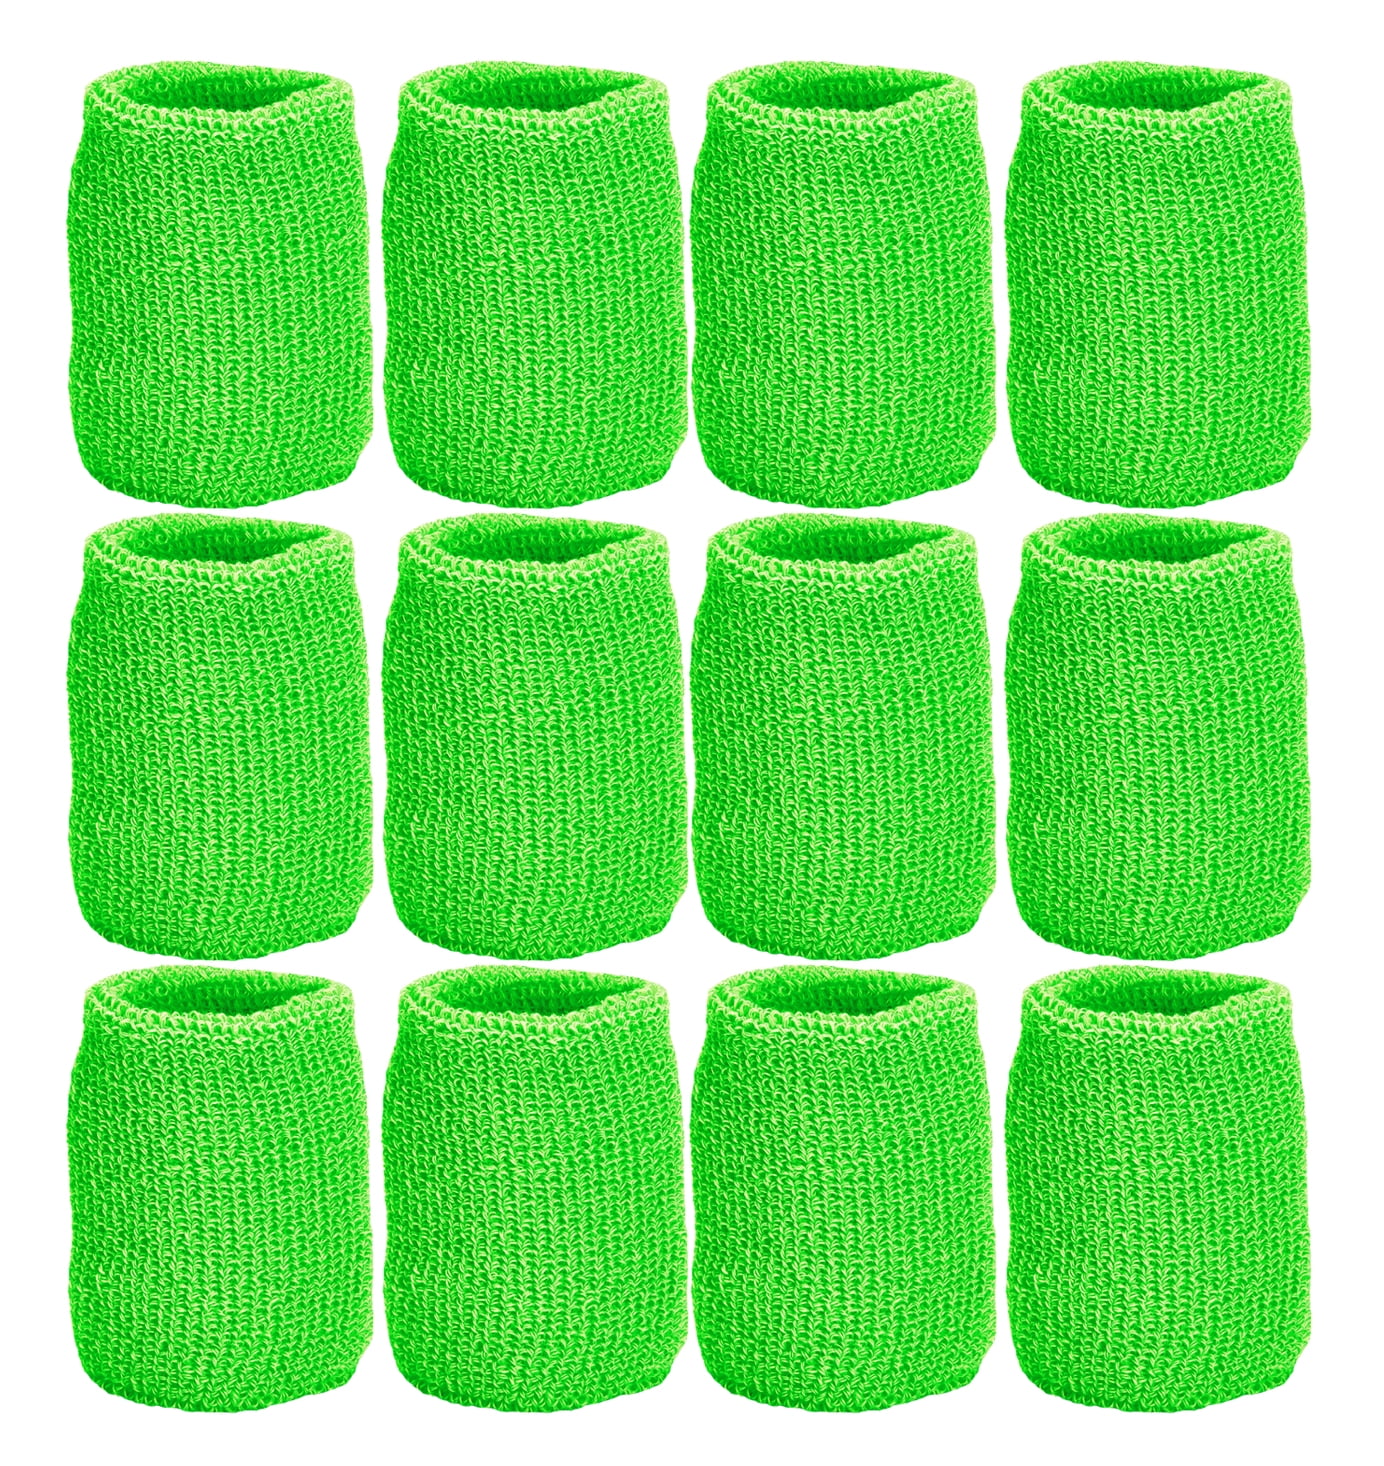 Unique Sports Athletic Performance Team Pack of 12 Wristbands (6 pair) - Lime Green